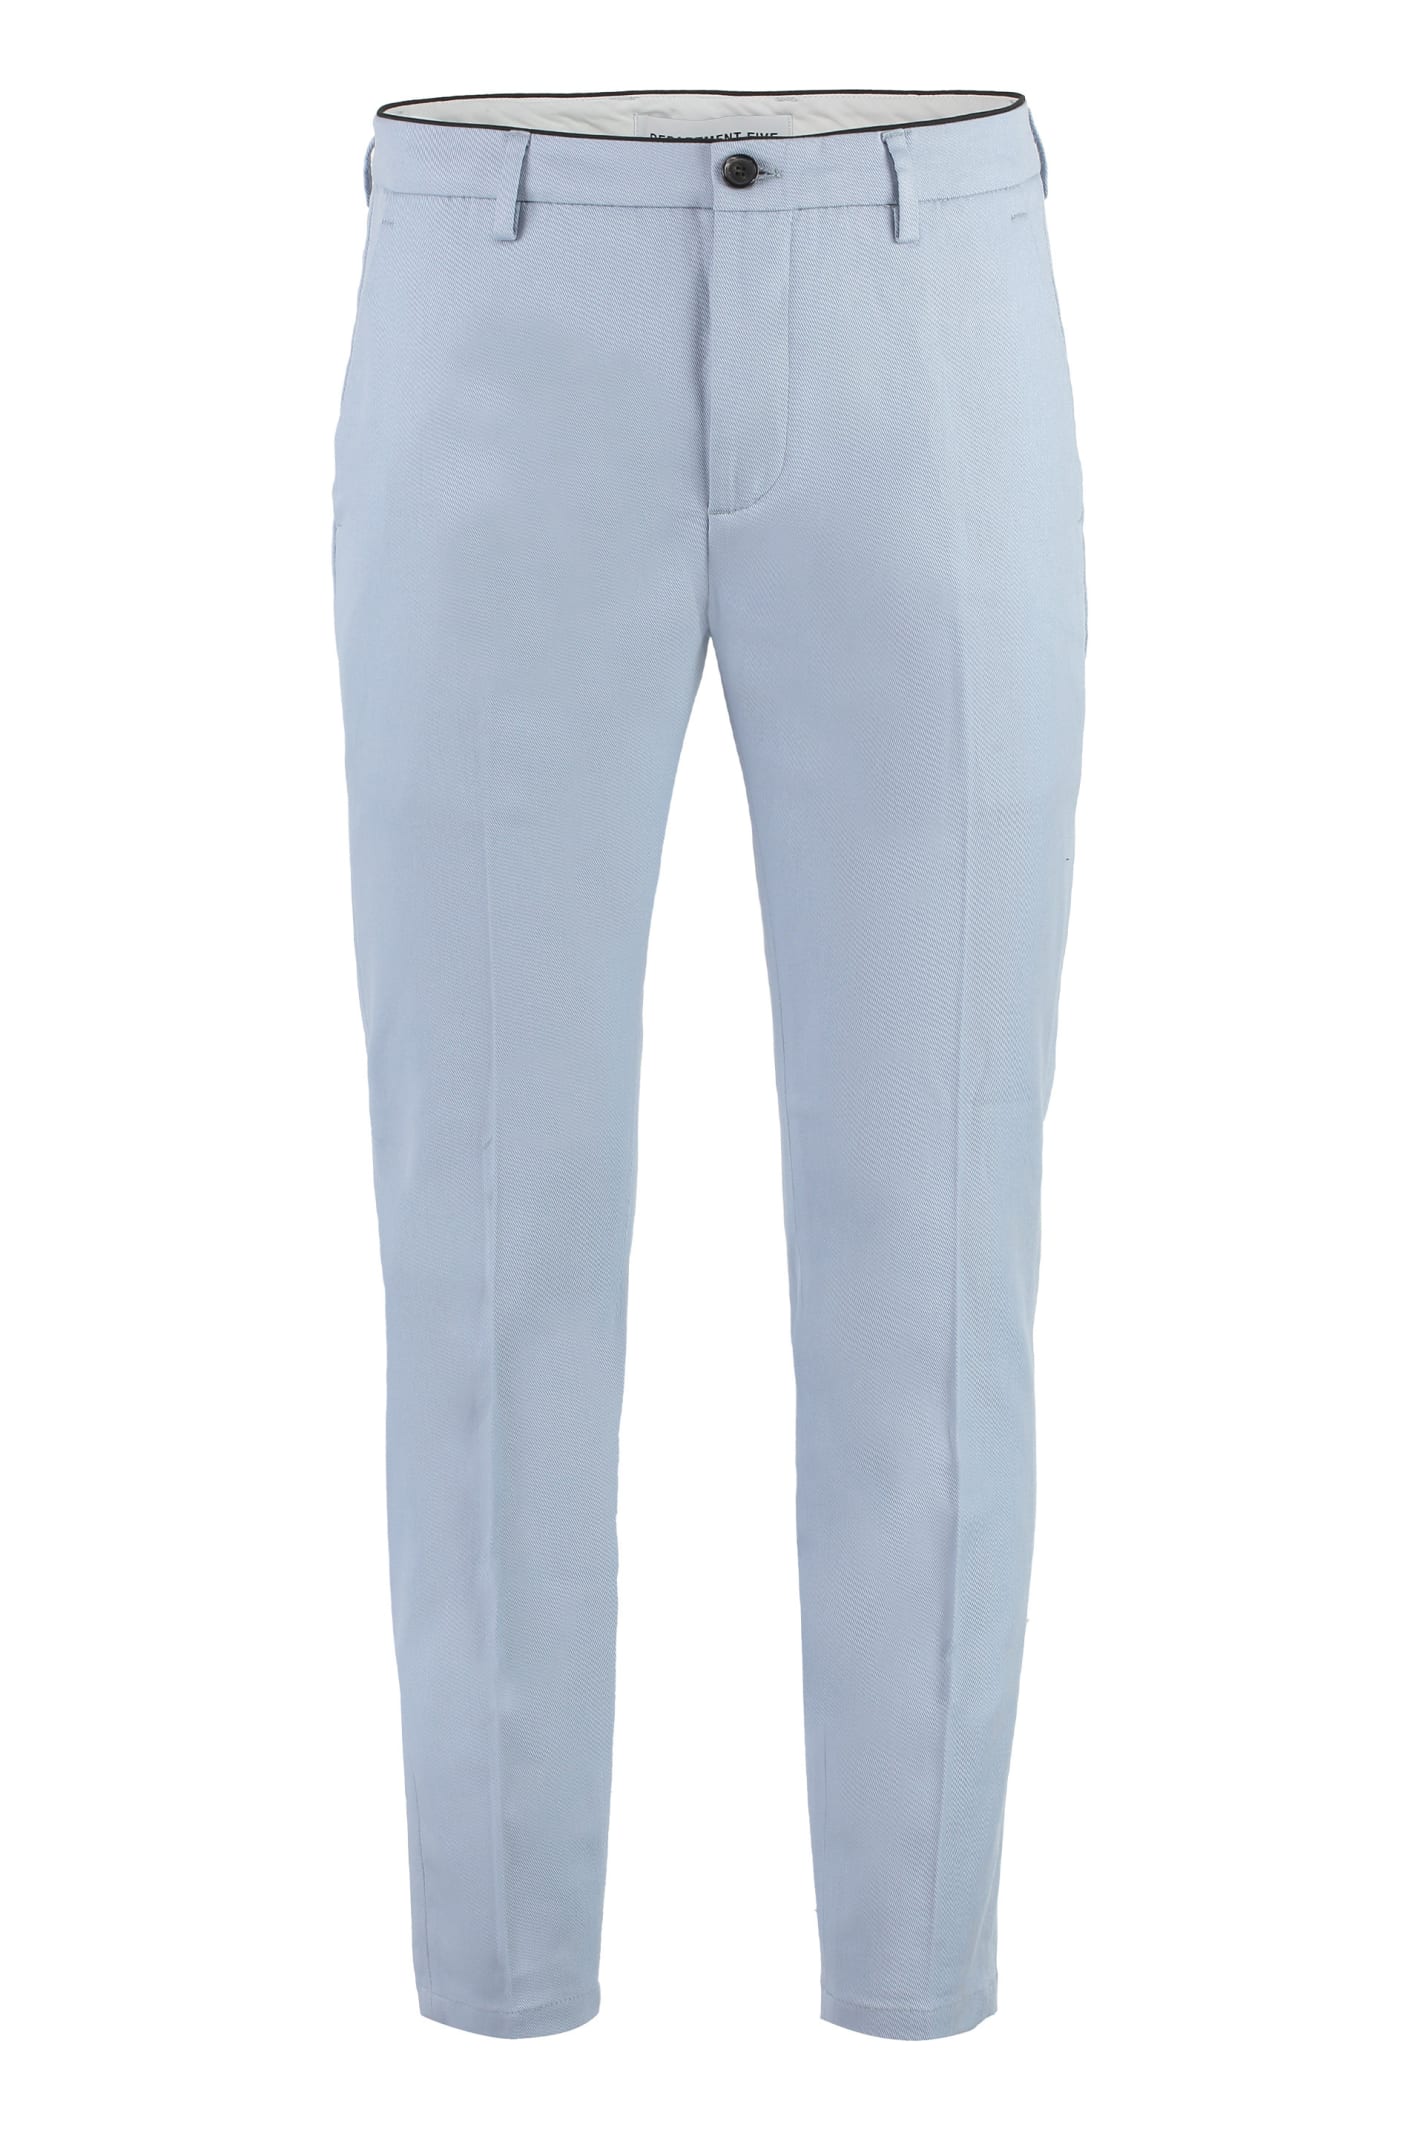 Department Five Prince Chino Trousers In Light Blue